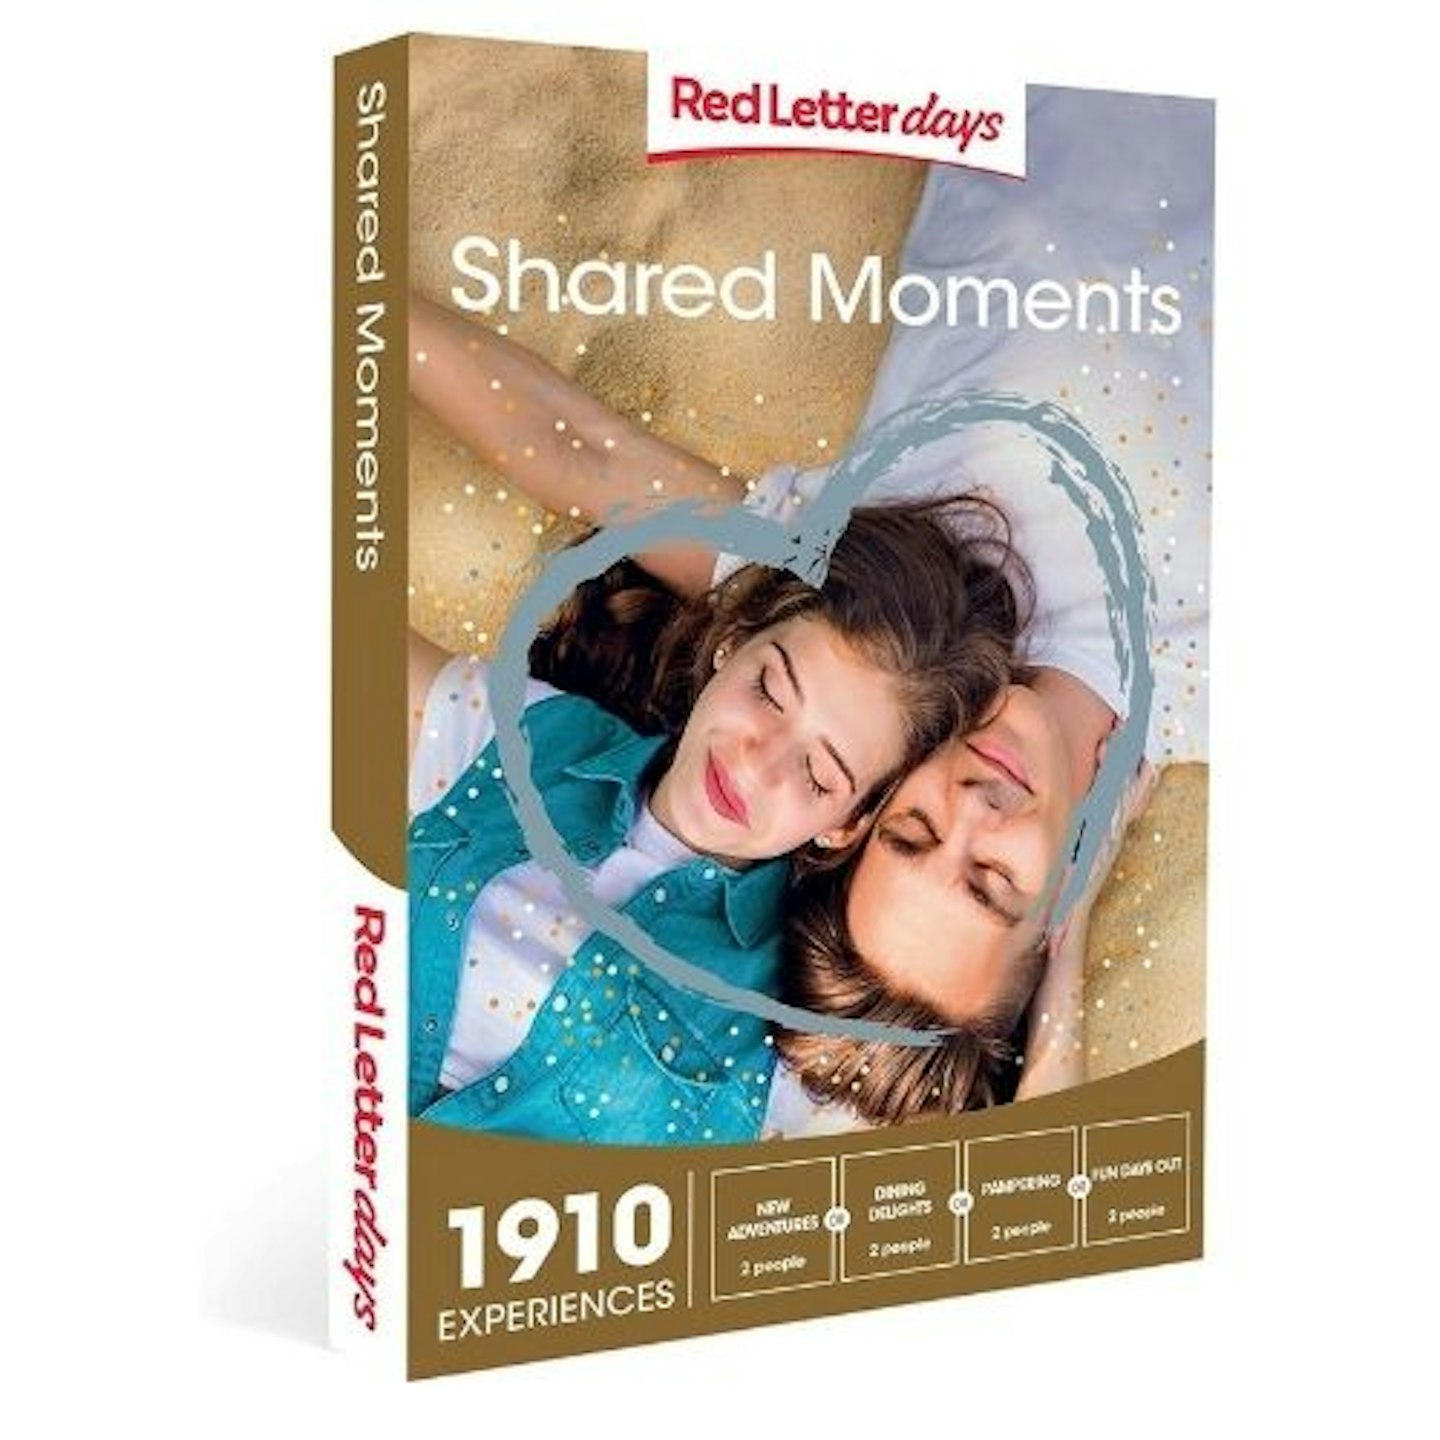 Red Letter Days Shared Moments Gift Voucher